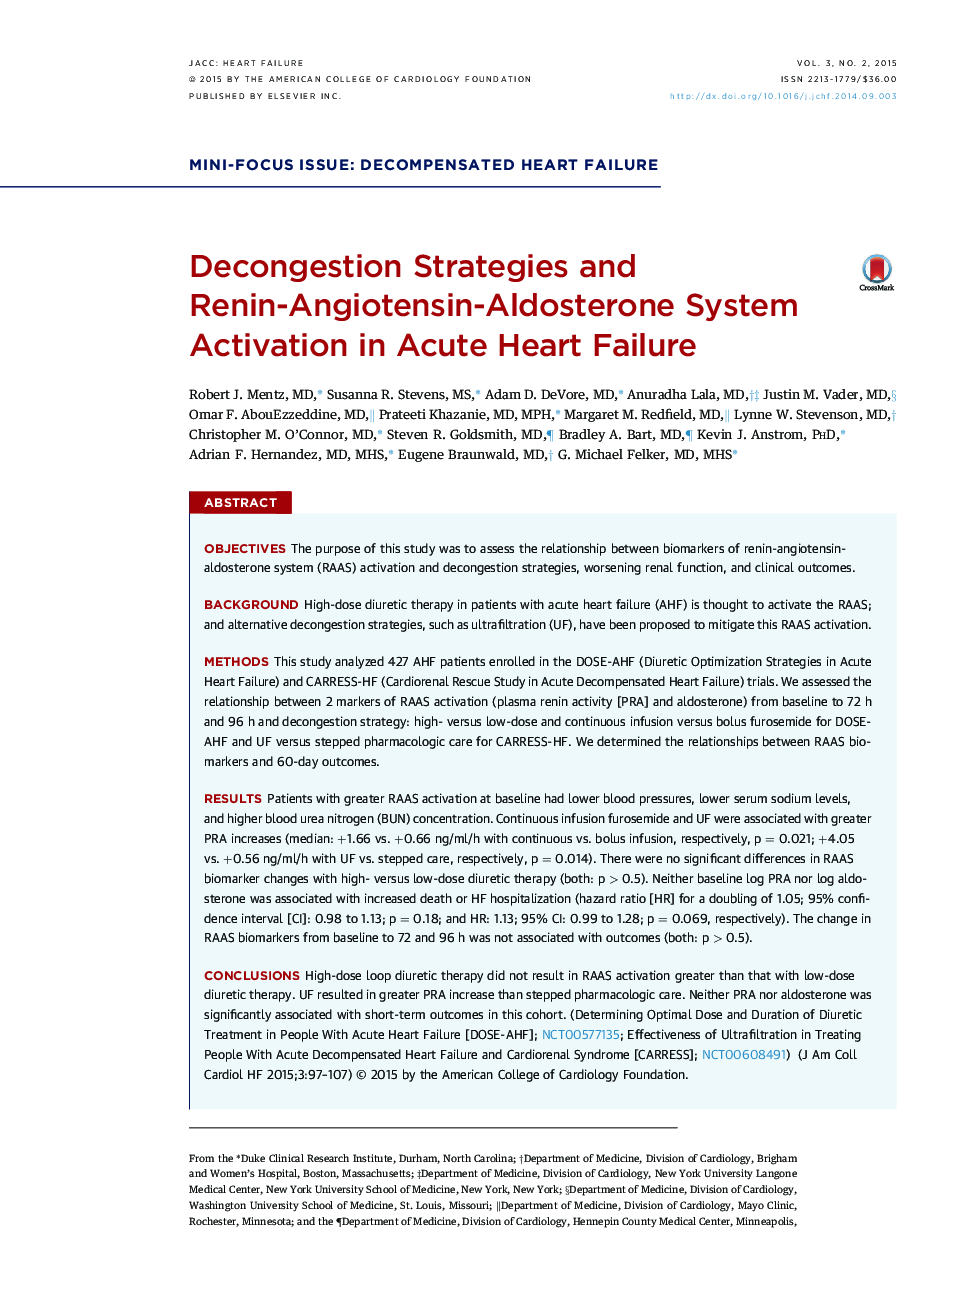 Decongestion Strategies and Renin-Angiotensin-Aldosterone System Activation in Acute Heart Failure 